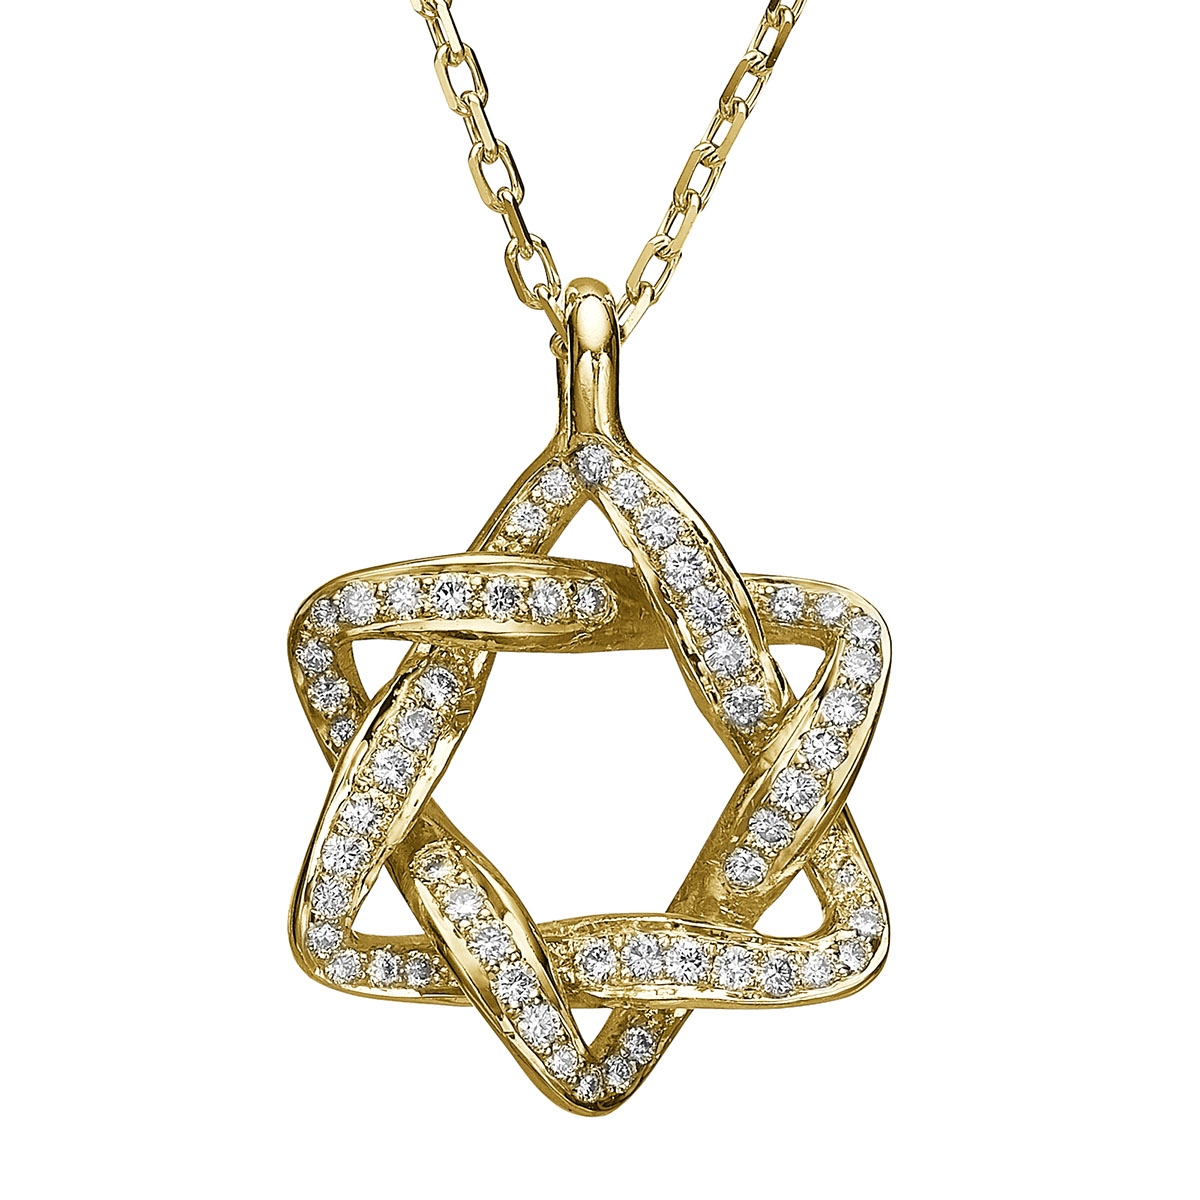 Diamond-Encrusted 18K Yellow Gold Rounded Star of David Necklace - 1